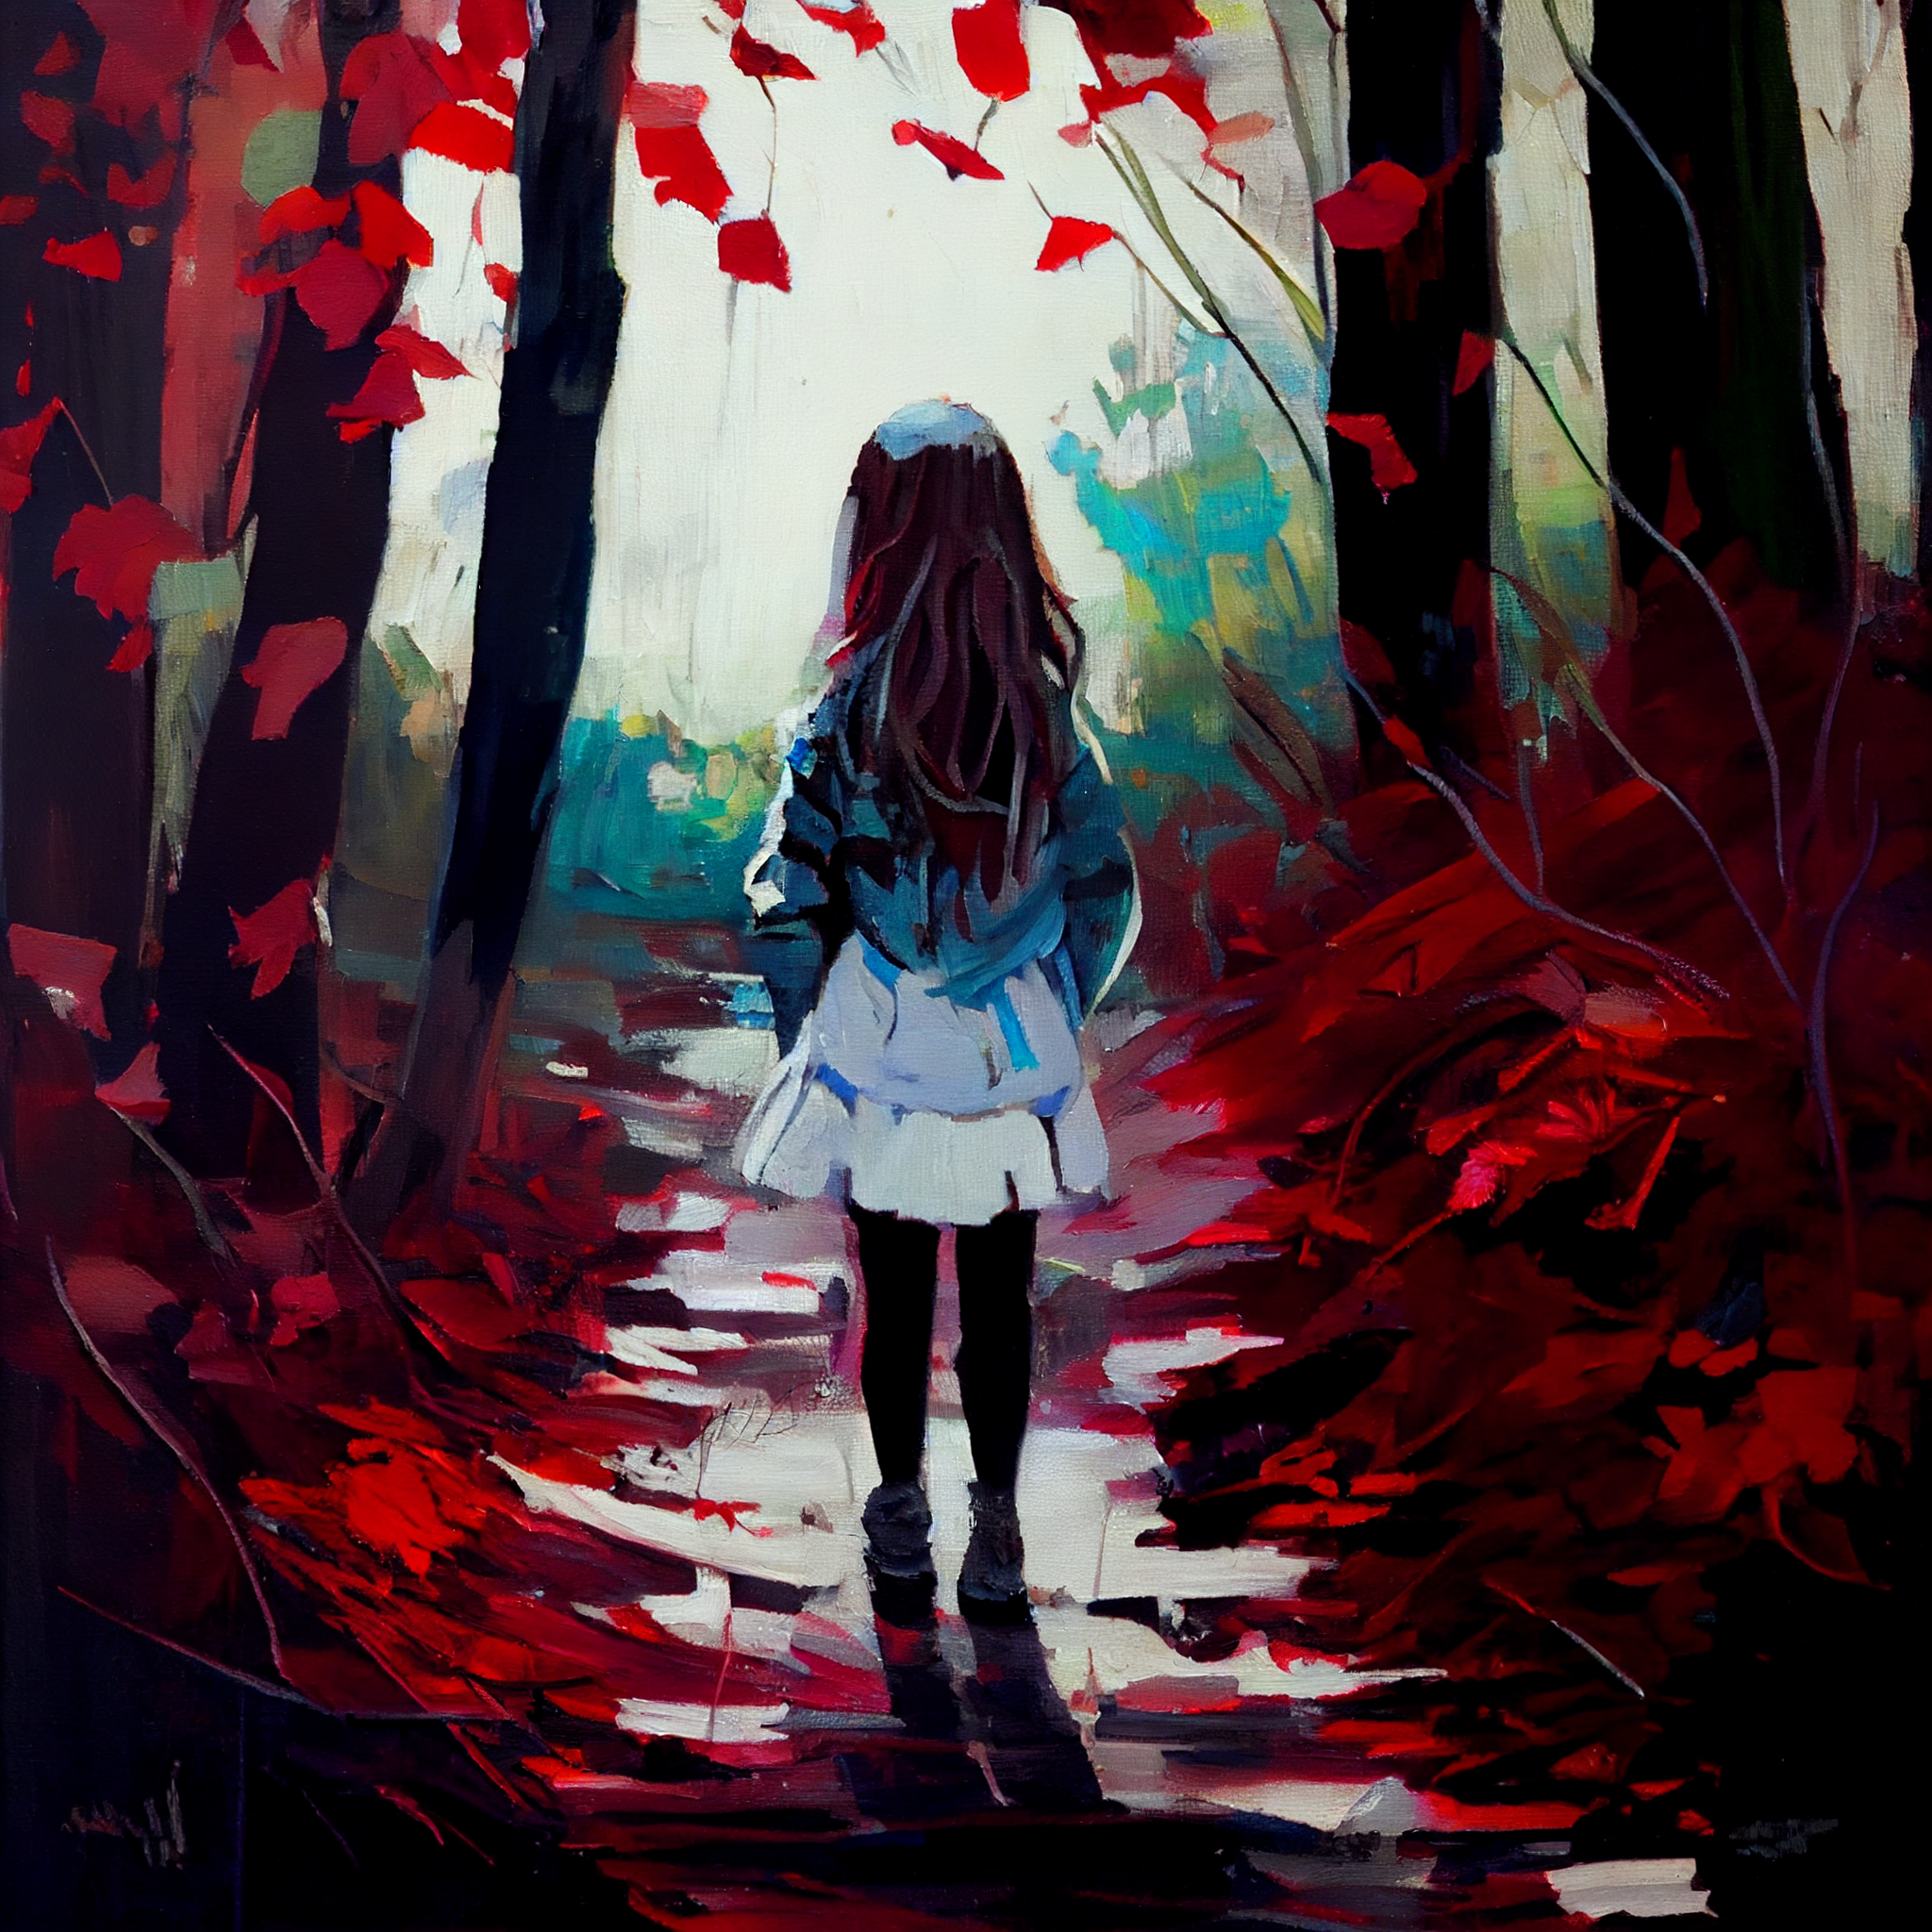 A Captivating Oil Painting Print of a Little Girl Exploring the Enchanting Woods